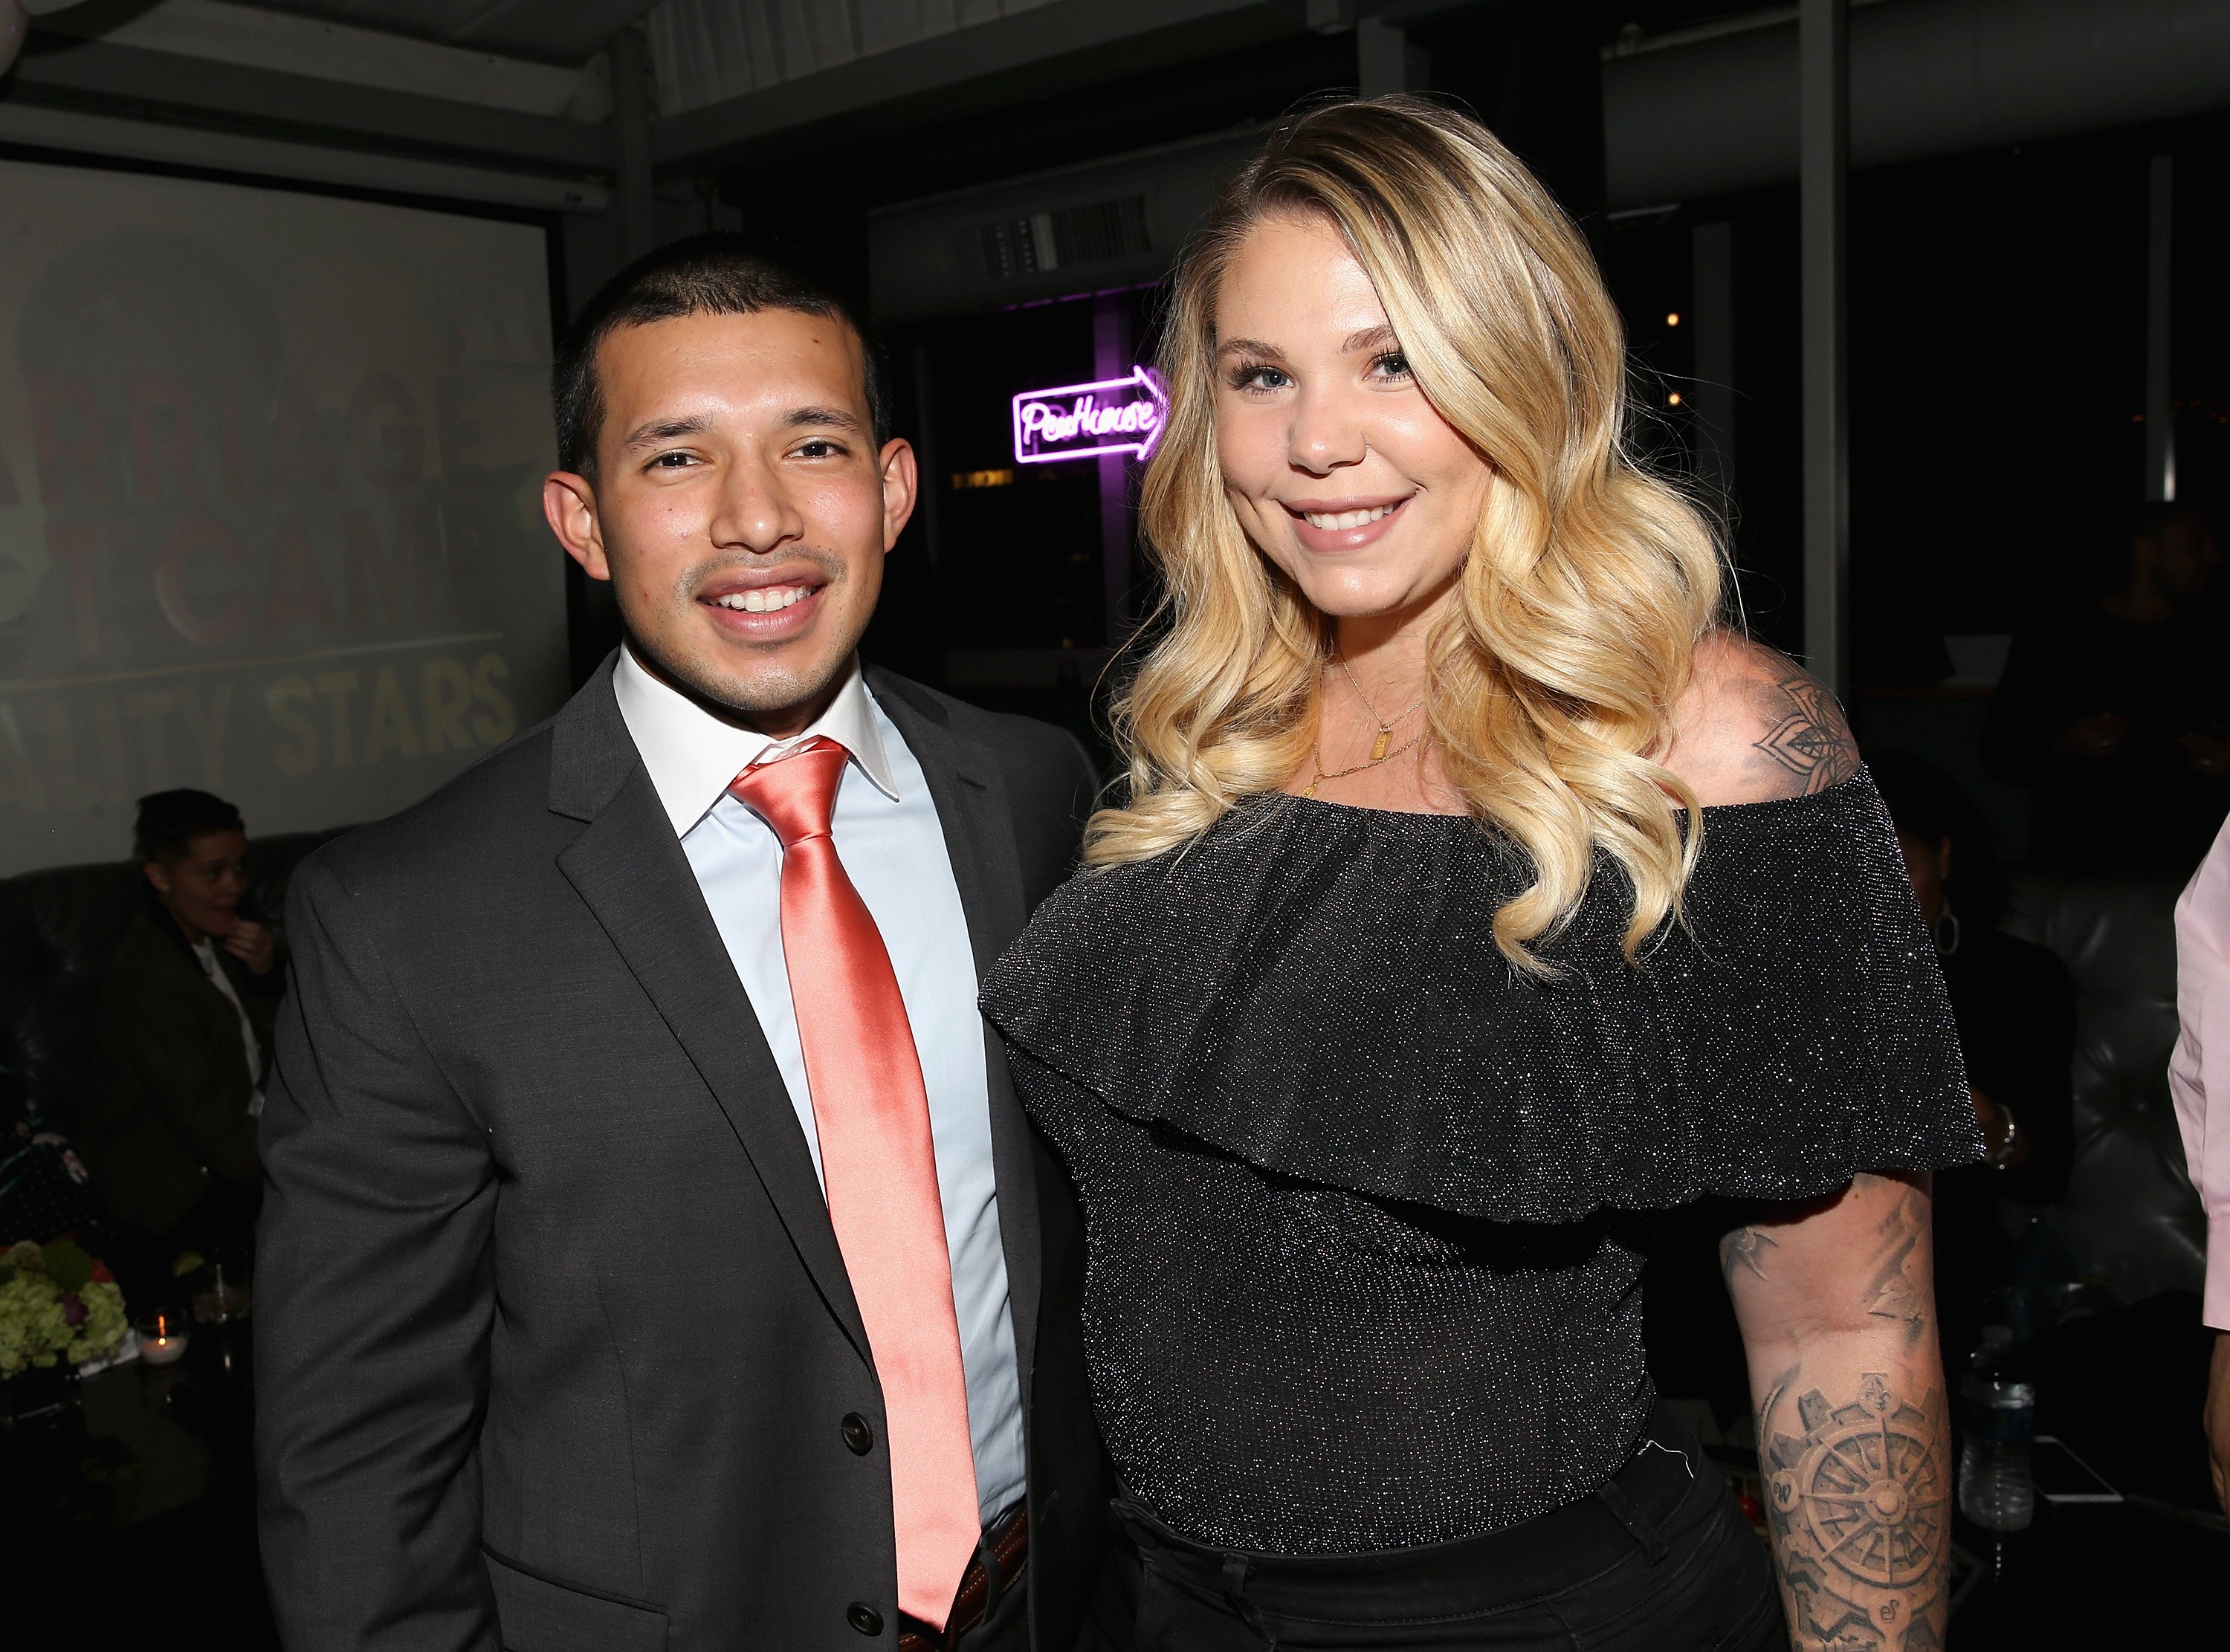 Javi Marroquin and Kailyn Lowry attend the exclusive premiere party for Marriage Boot Camp Reality Stars Season 9